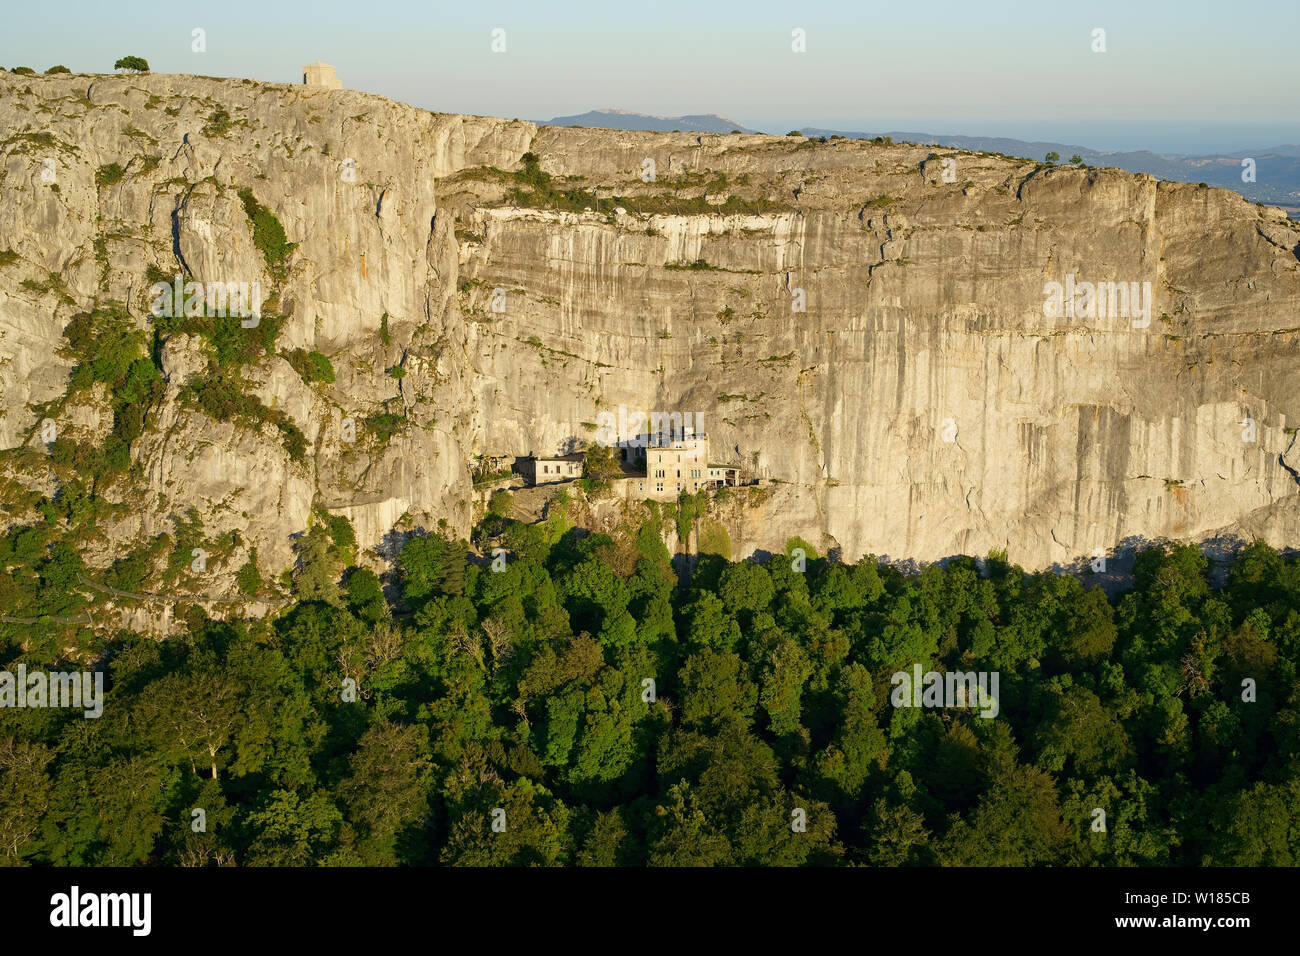 AERIAL VIEW. Sanctuary of Sainte-Baume on the ledge of a rock face and a chapel standing on the clifftop. Plan d'Aups, Provence, France. Stock Photo